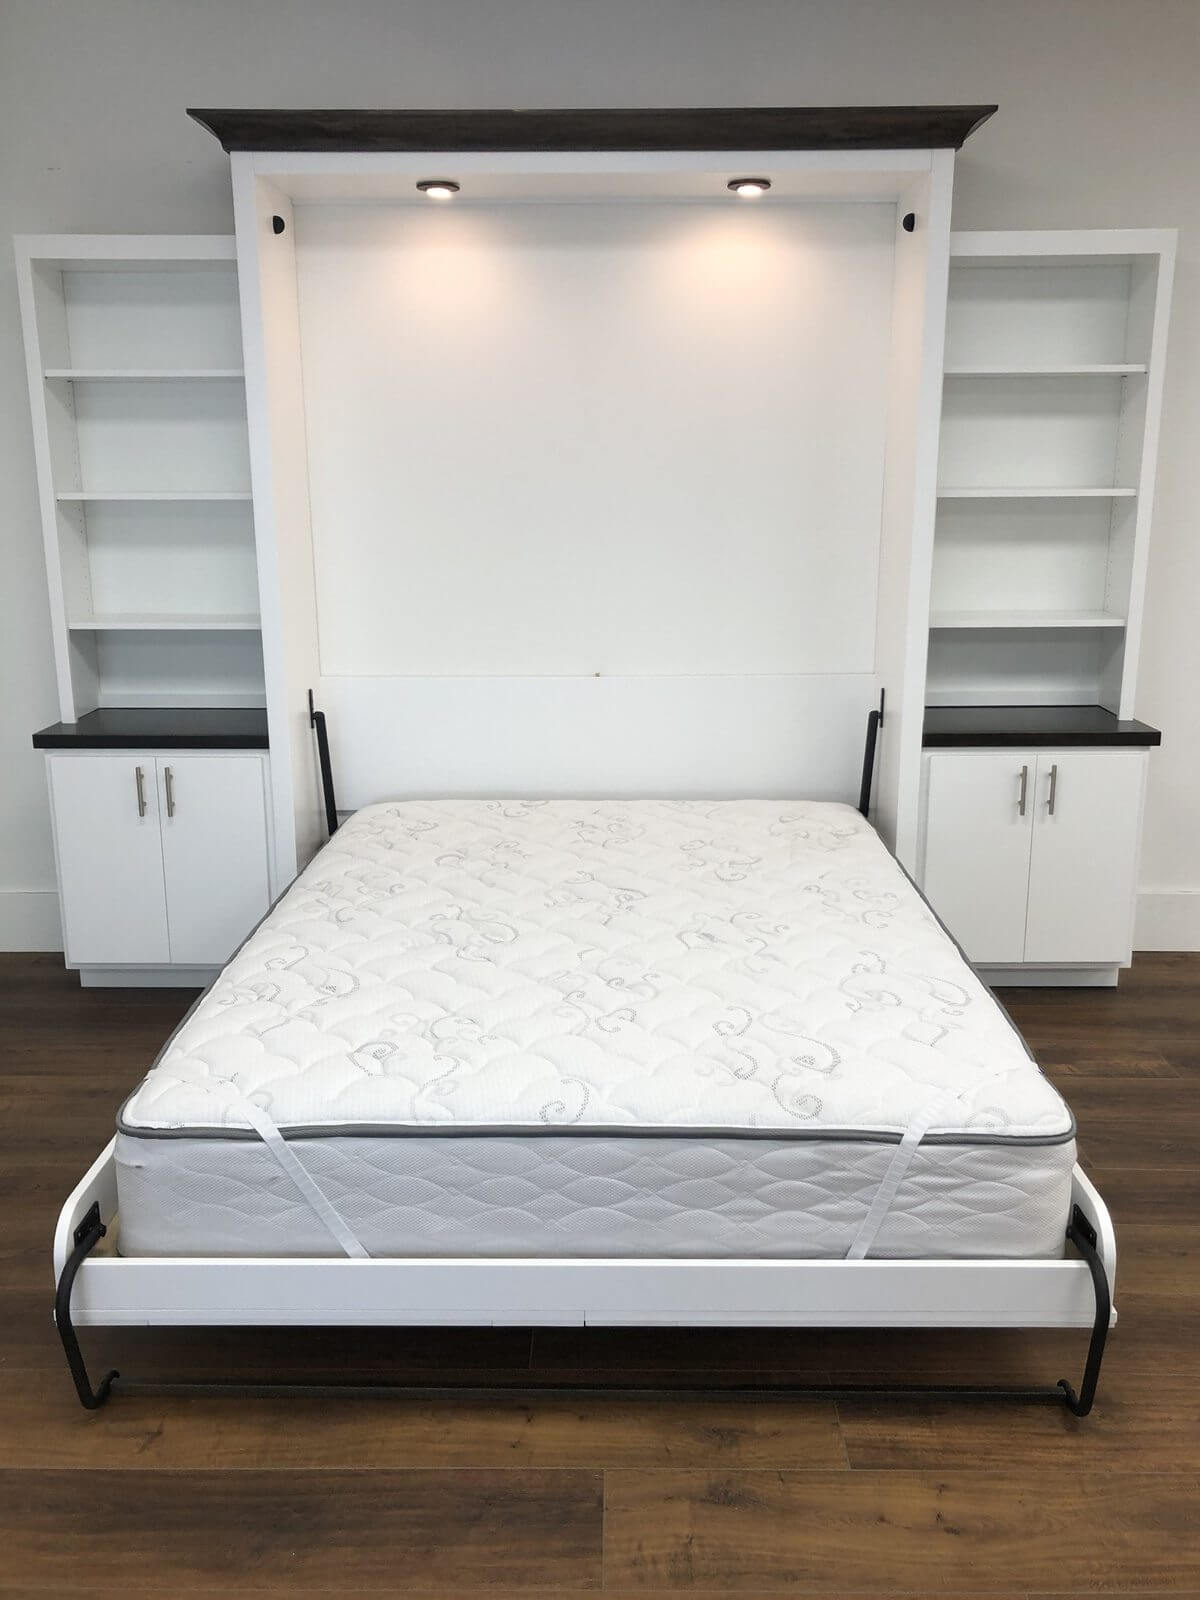 Tips For Purchasing a Murphy Bed Kit